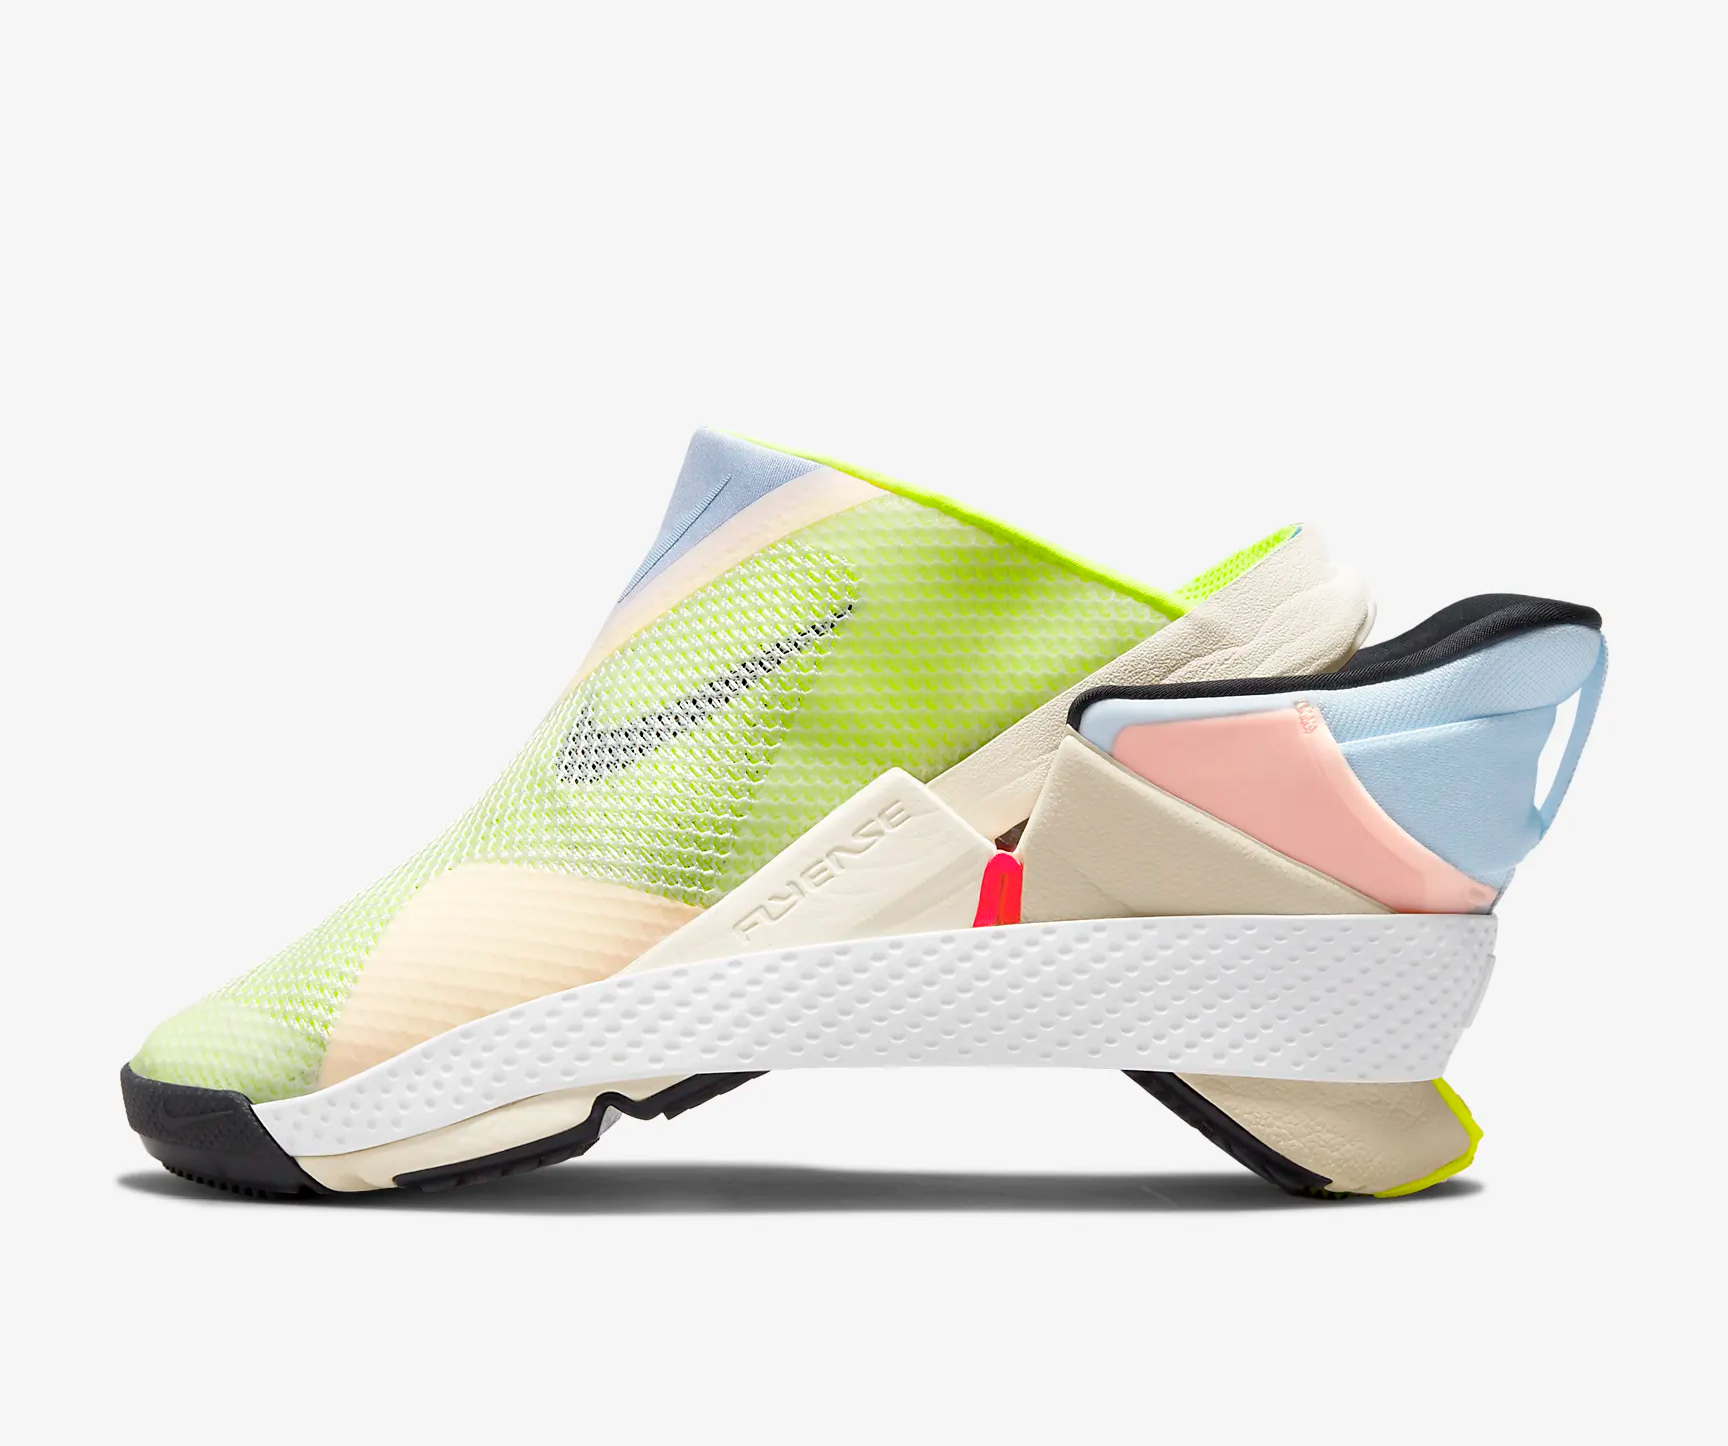 Nike GO FlyEase – White Volt | sneakerb0b RELEASES